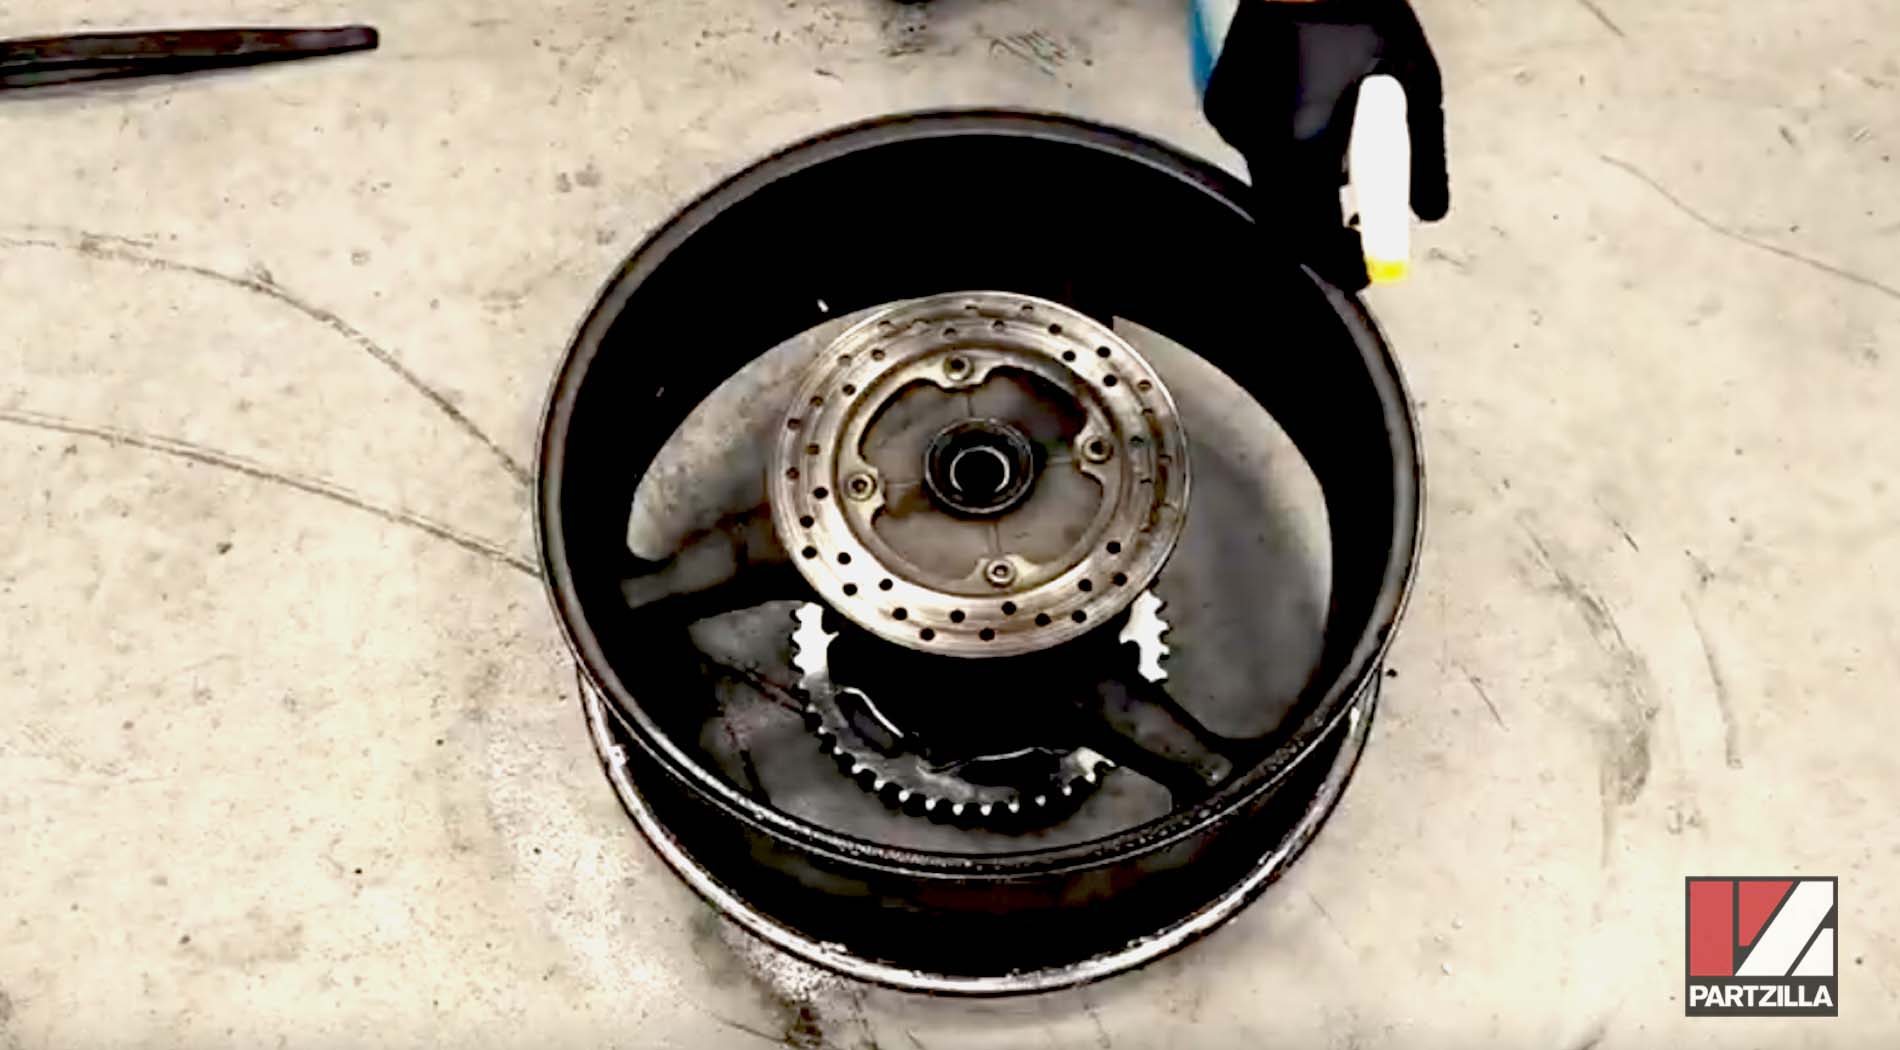 Motorcycle wheel cleaning